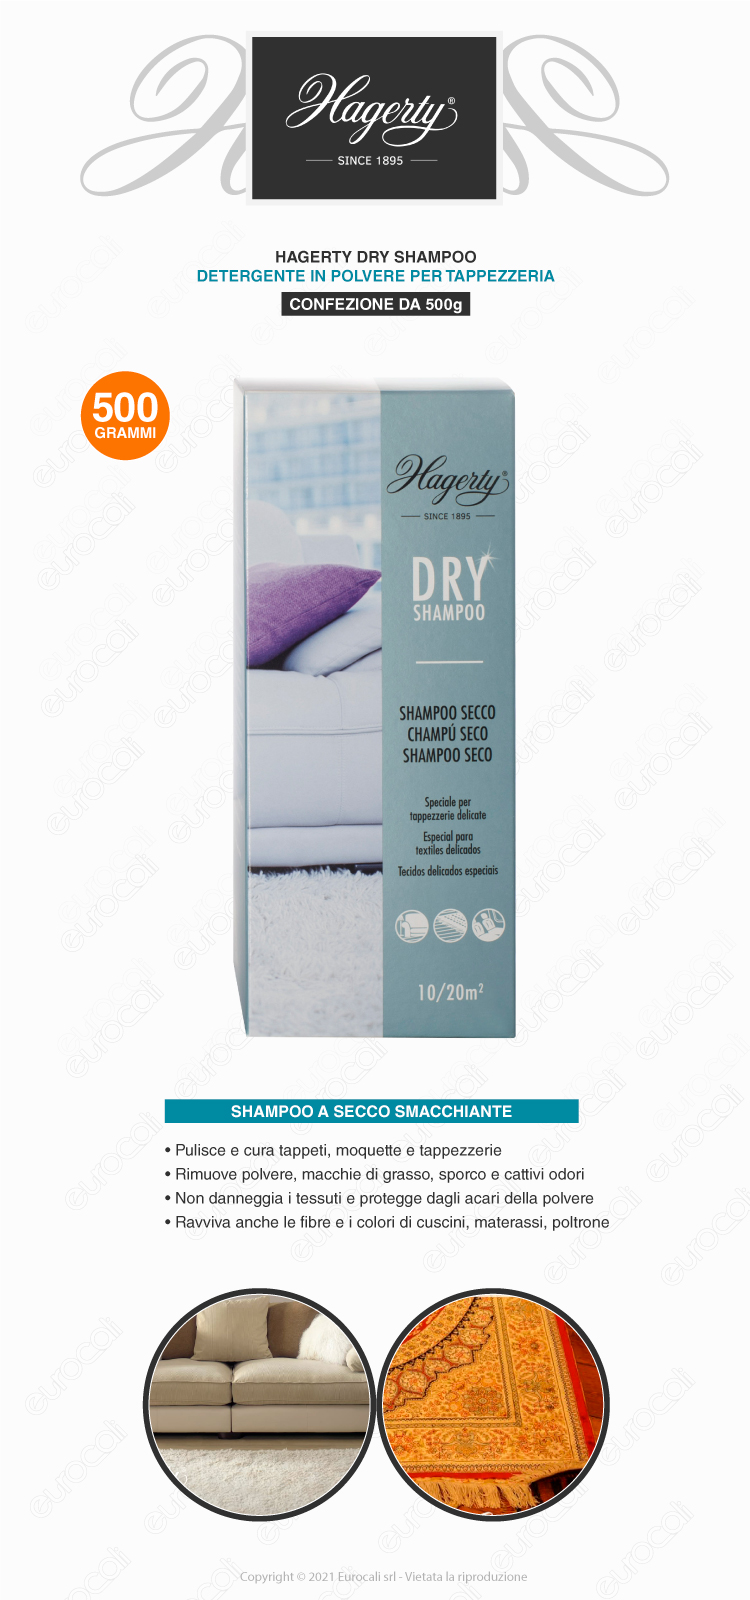 hagerty dry shampoo polvere detergente per tappezzerie delicate 500g